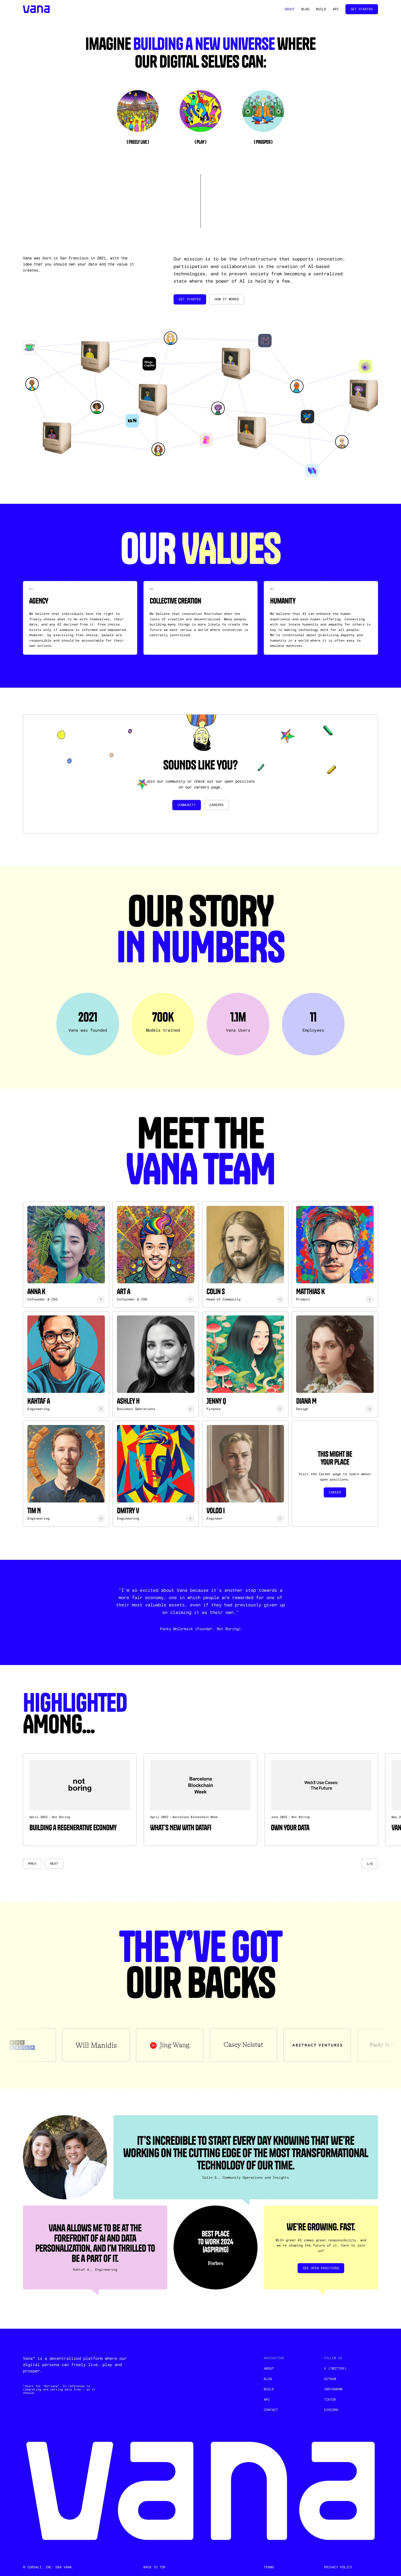 Vana Landing Page Example: Explore your digital identity with Vana's ecosystem of personalized AI applications. Join an active community of builders and creators!